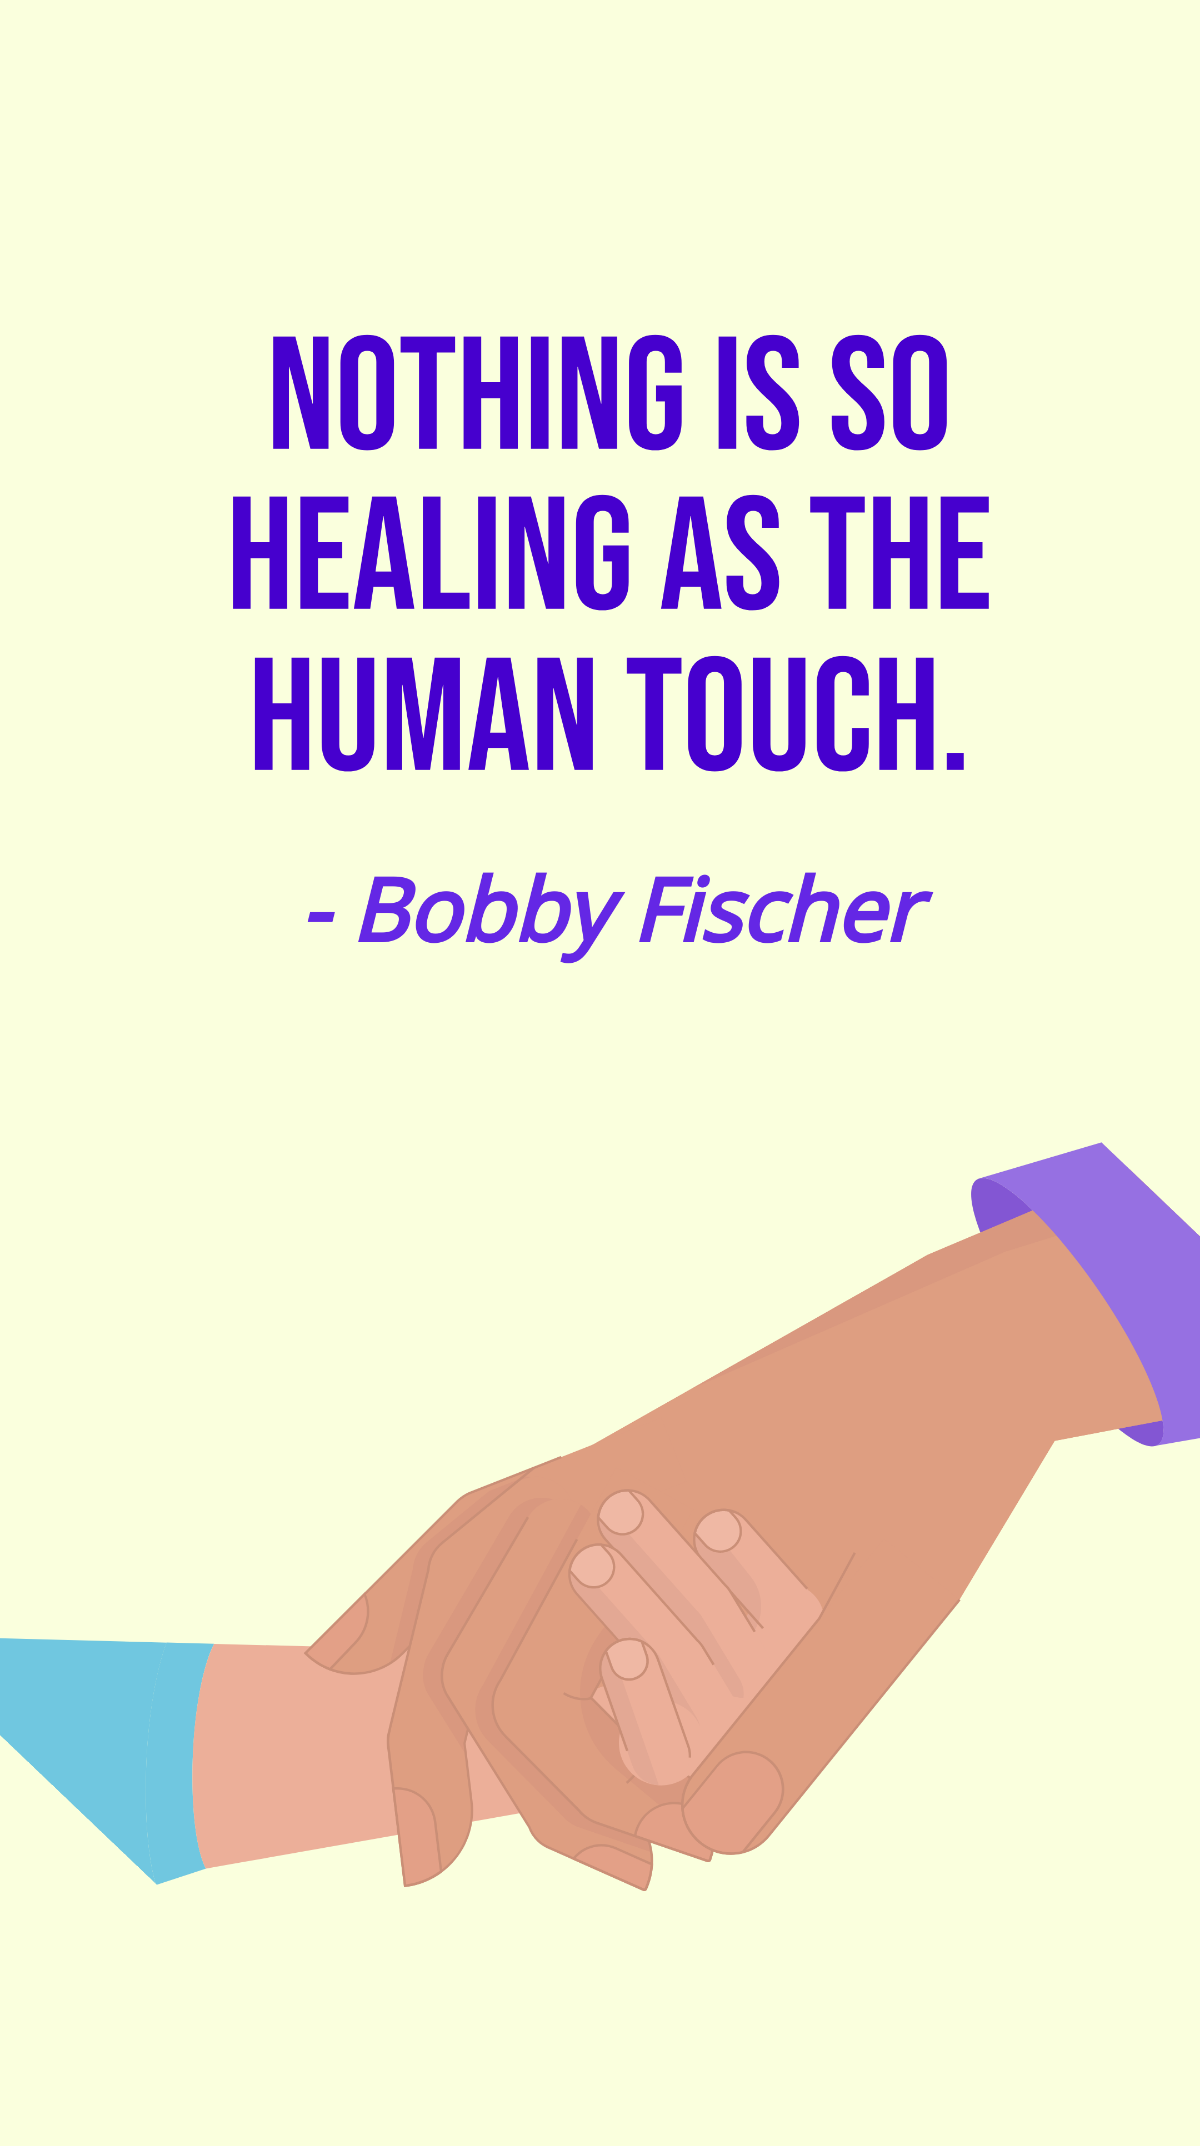 Bobby Fischer - Nothing is so healing as the human touch. Template